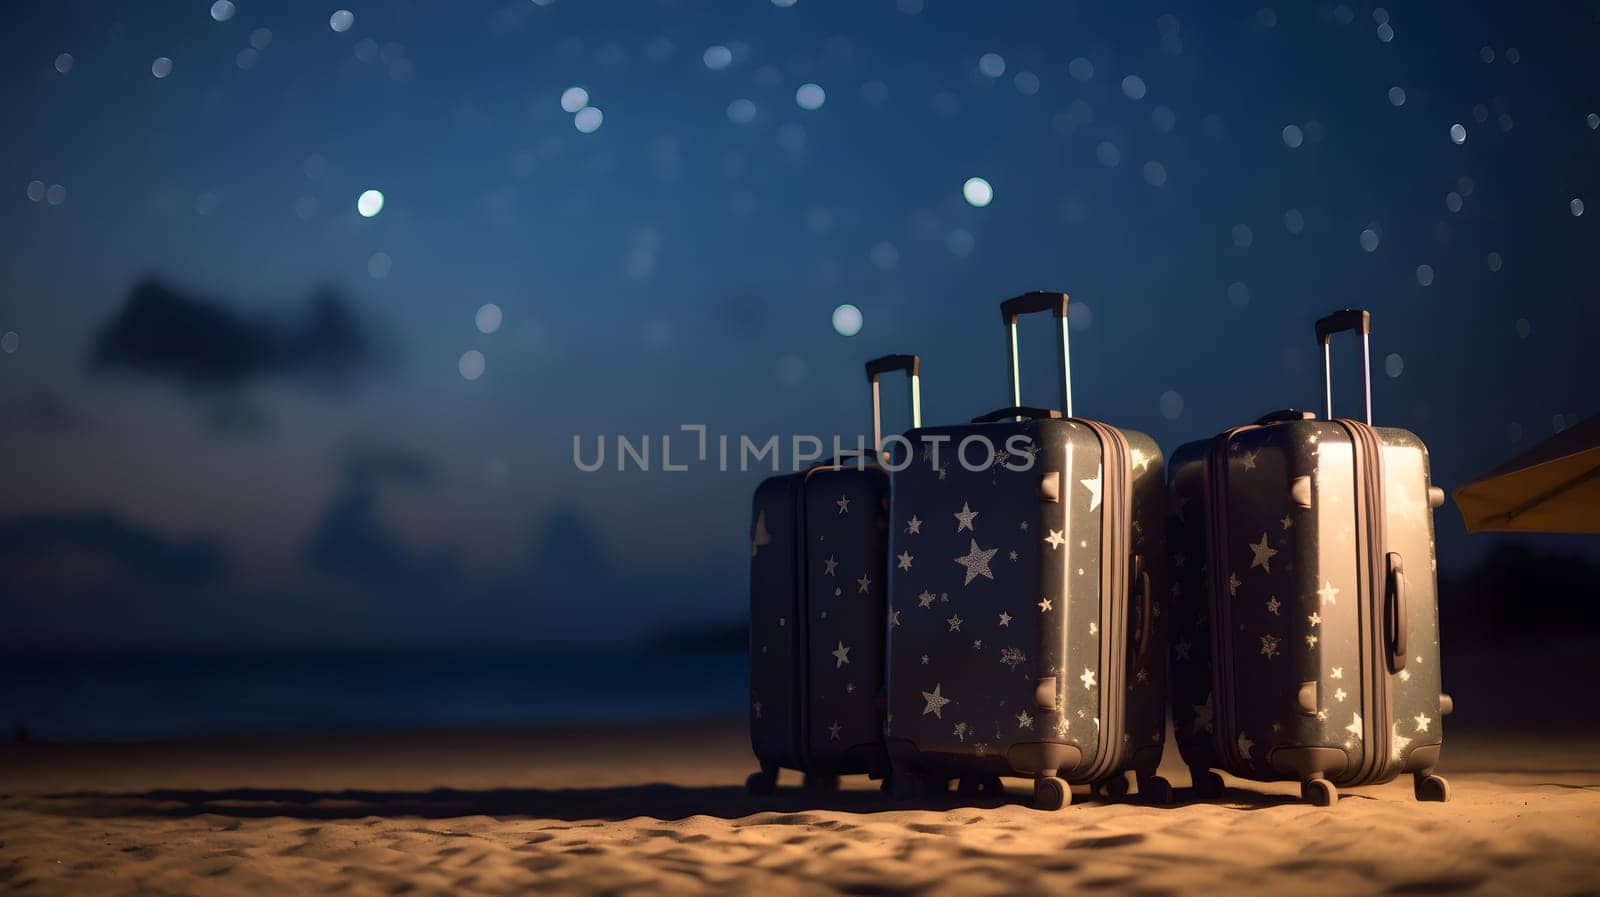 Three modern plastic suitcases on tropical resort beach at night. Neural network generated in May 2023. Not based on any actual person, scene or pattern.